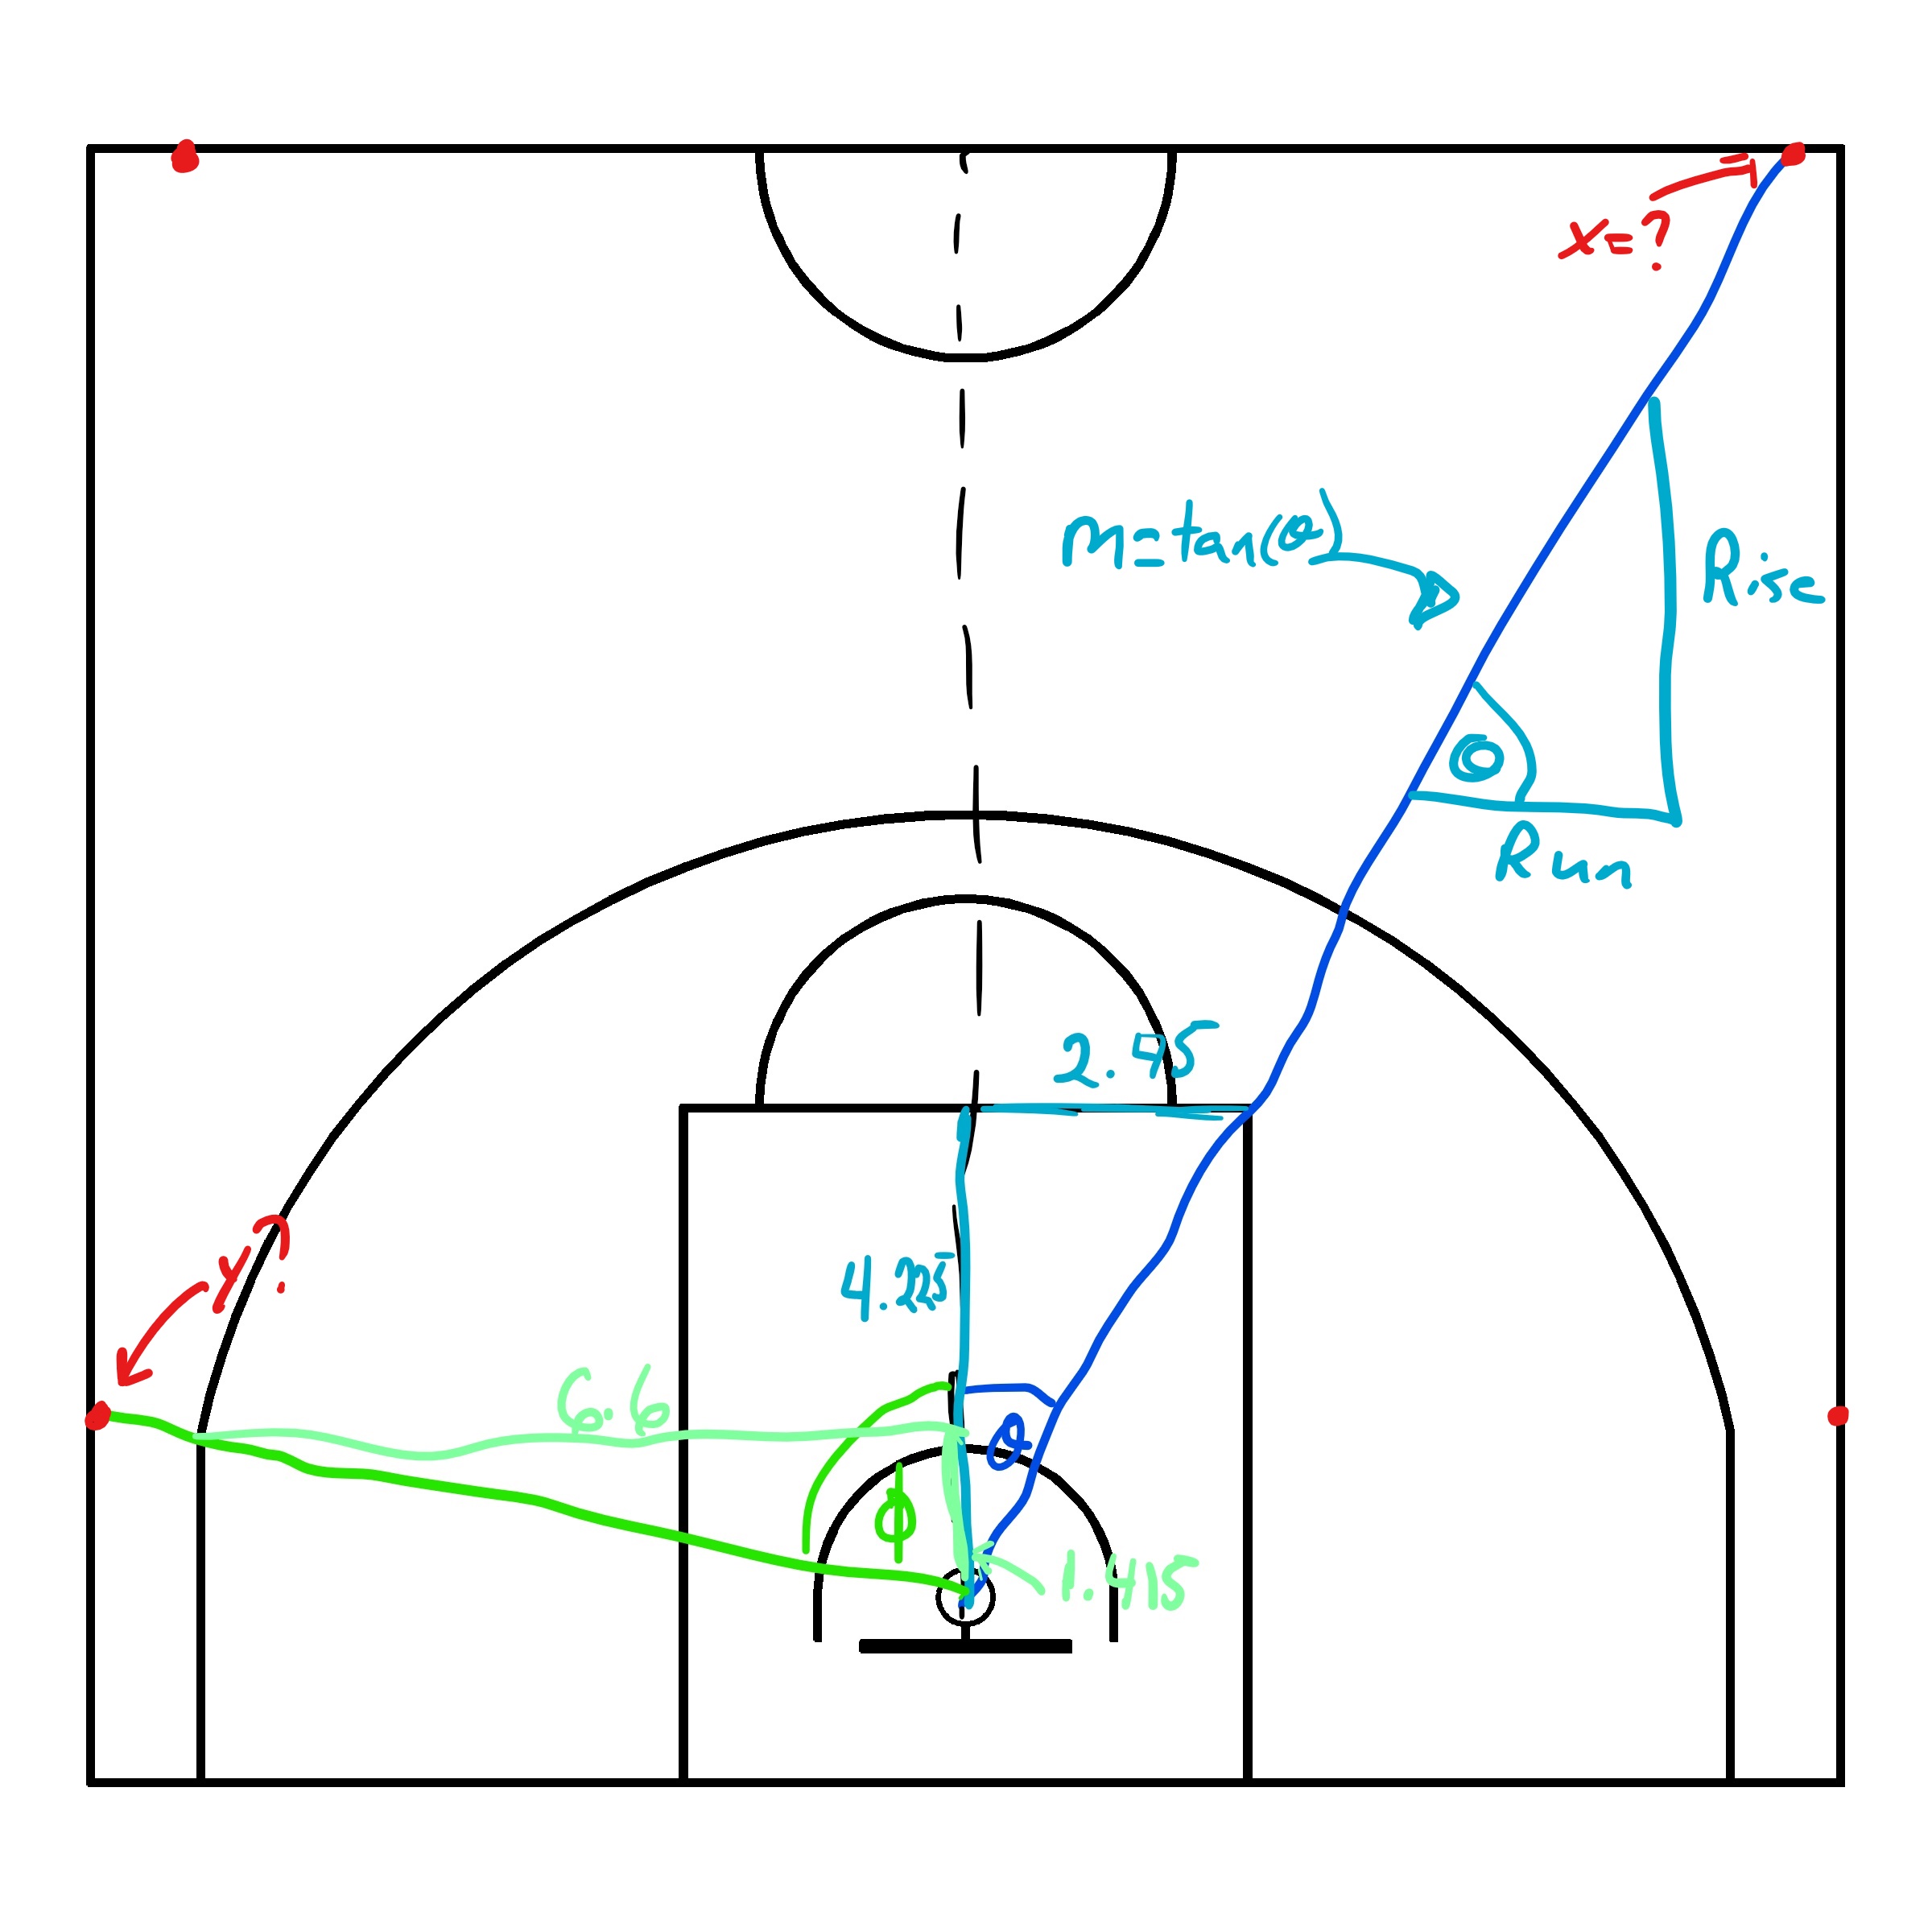 Choice of arbitrary lines to divide the court by angle